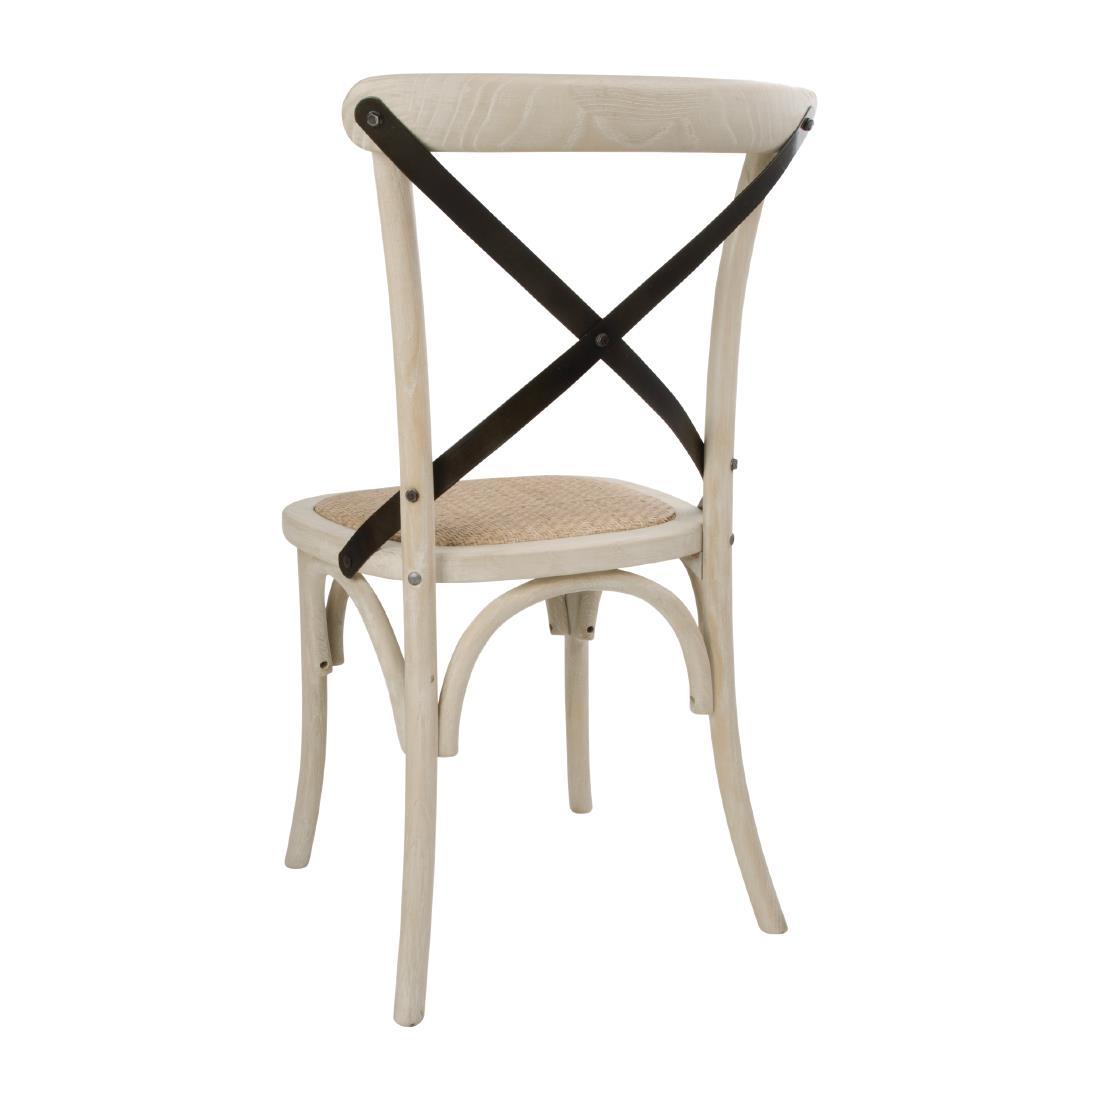 Bolero Bentwood Chairs with Metal Cross Backrest (Pack of 2) - DR306  - 4